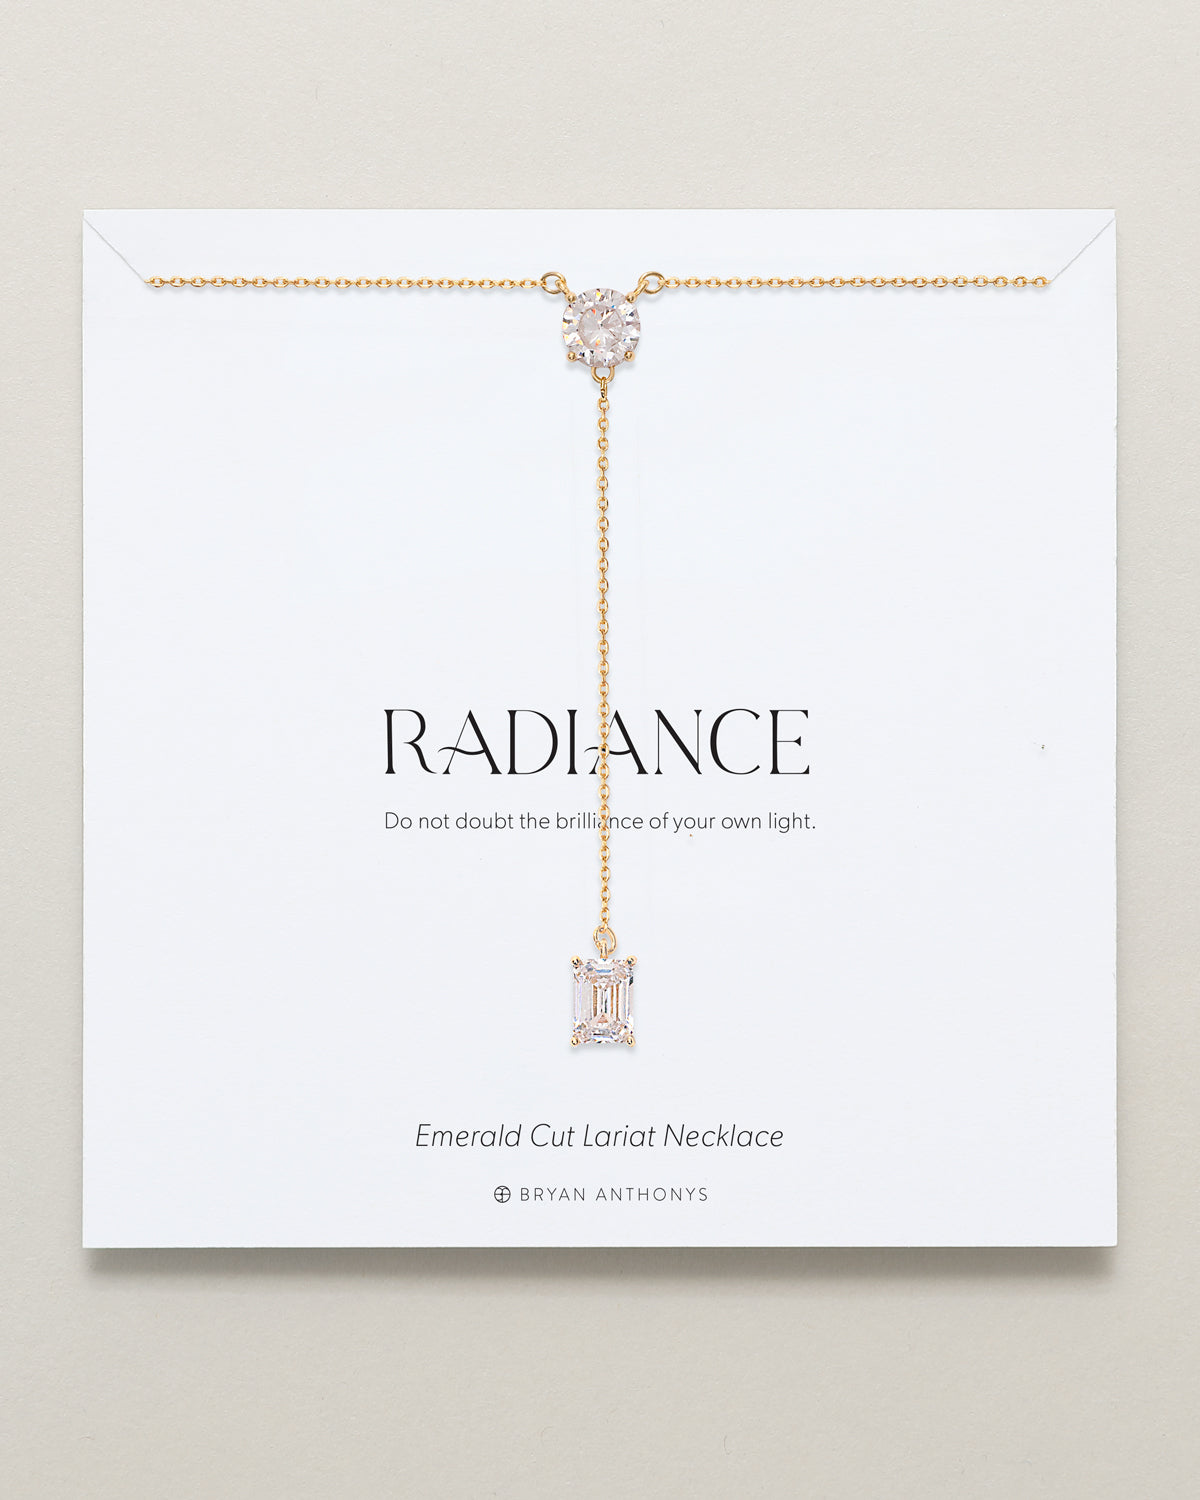 Bryan Anthonys Radiance Collection Emerald Cut Lariat Necklace Gold On Card